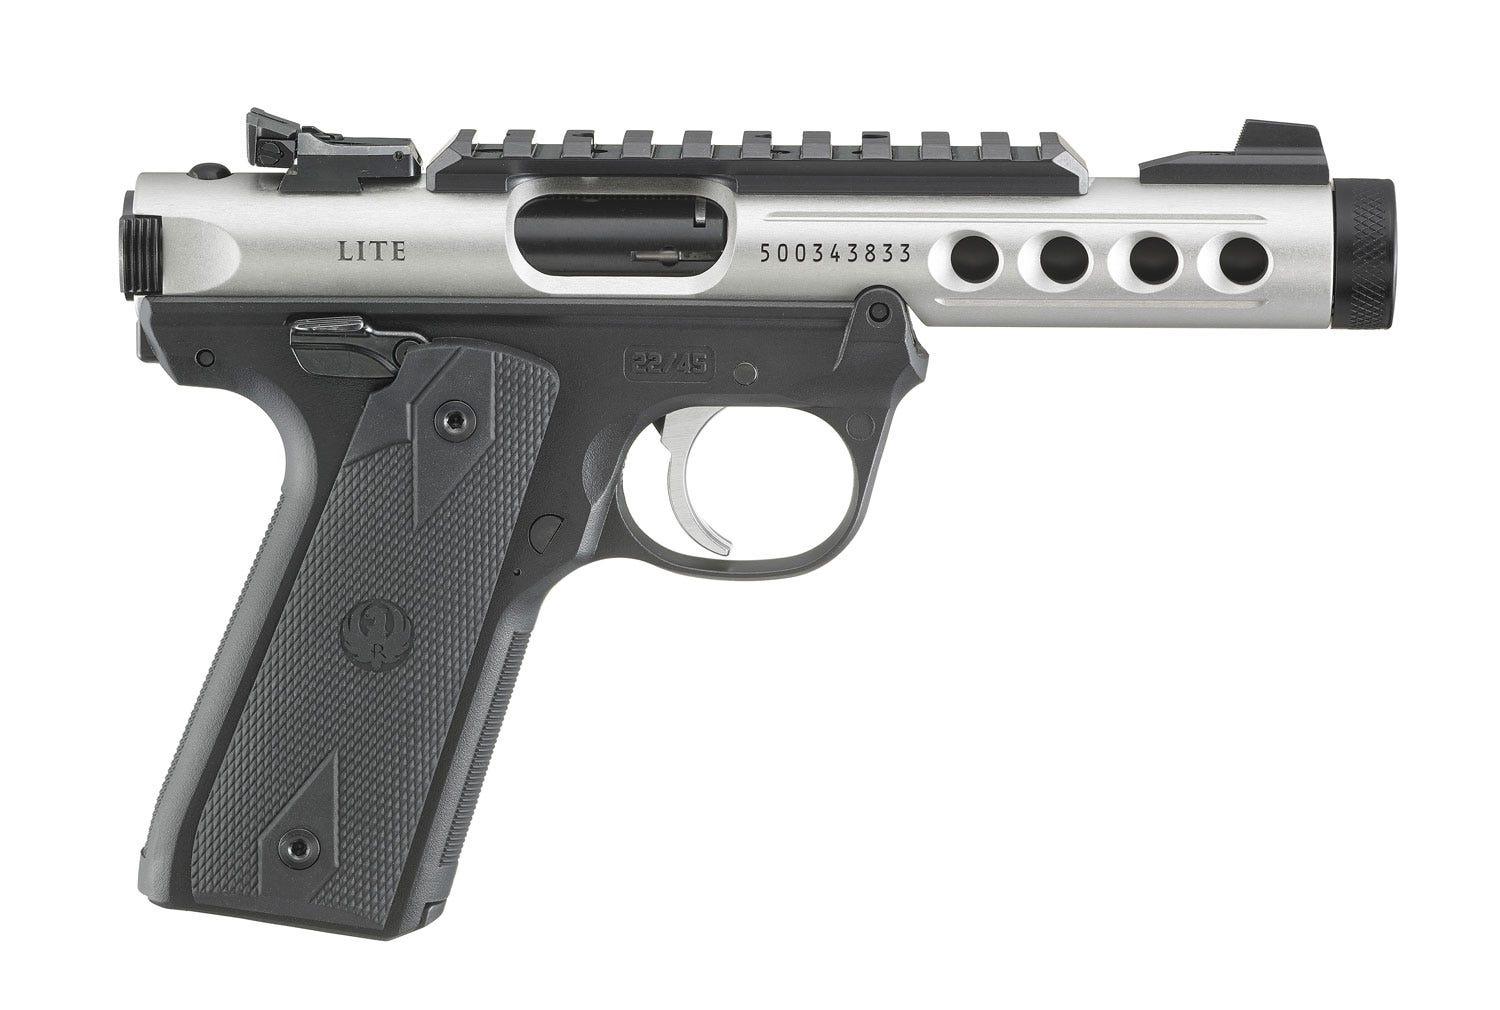 Ruger Mark IV 22/45 Lite Matte Stainless .22 LR 4.4" Barrel 10-Rounds 1911 Grips - $599.99 ($7.99 S/H on firearms)